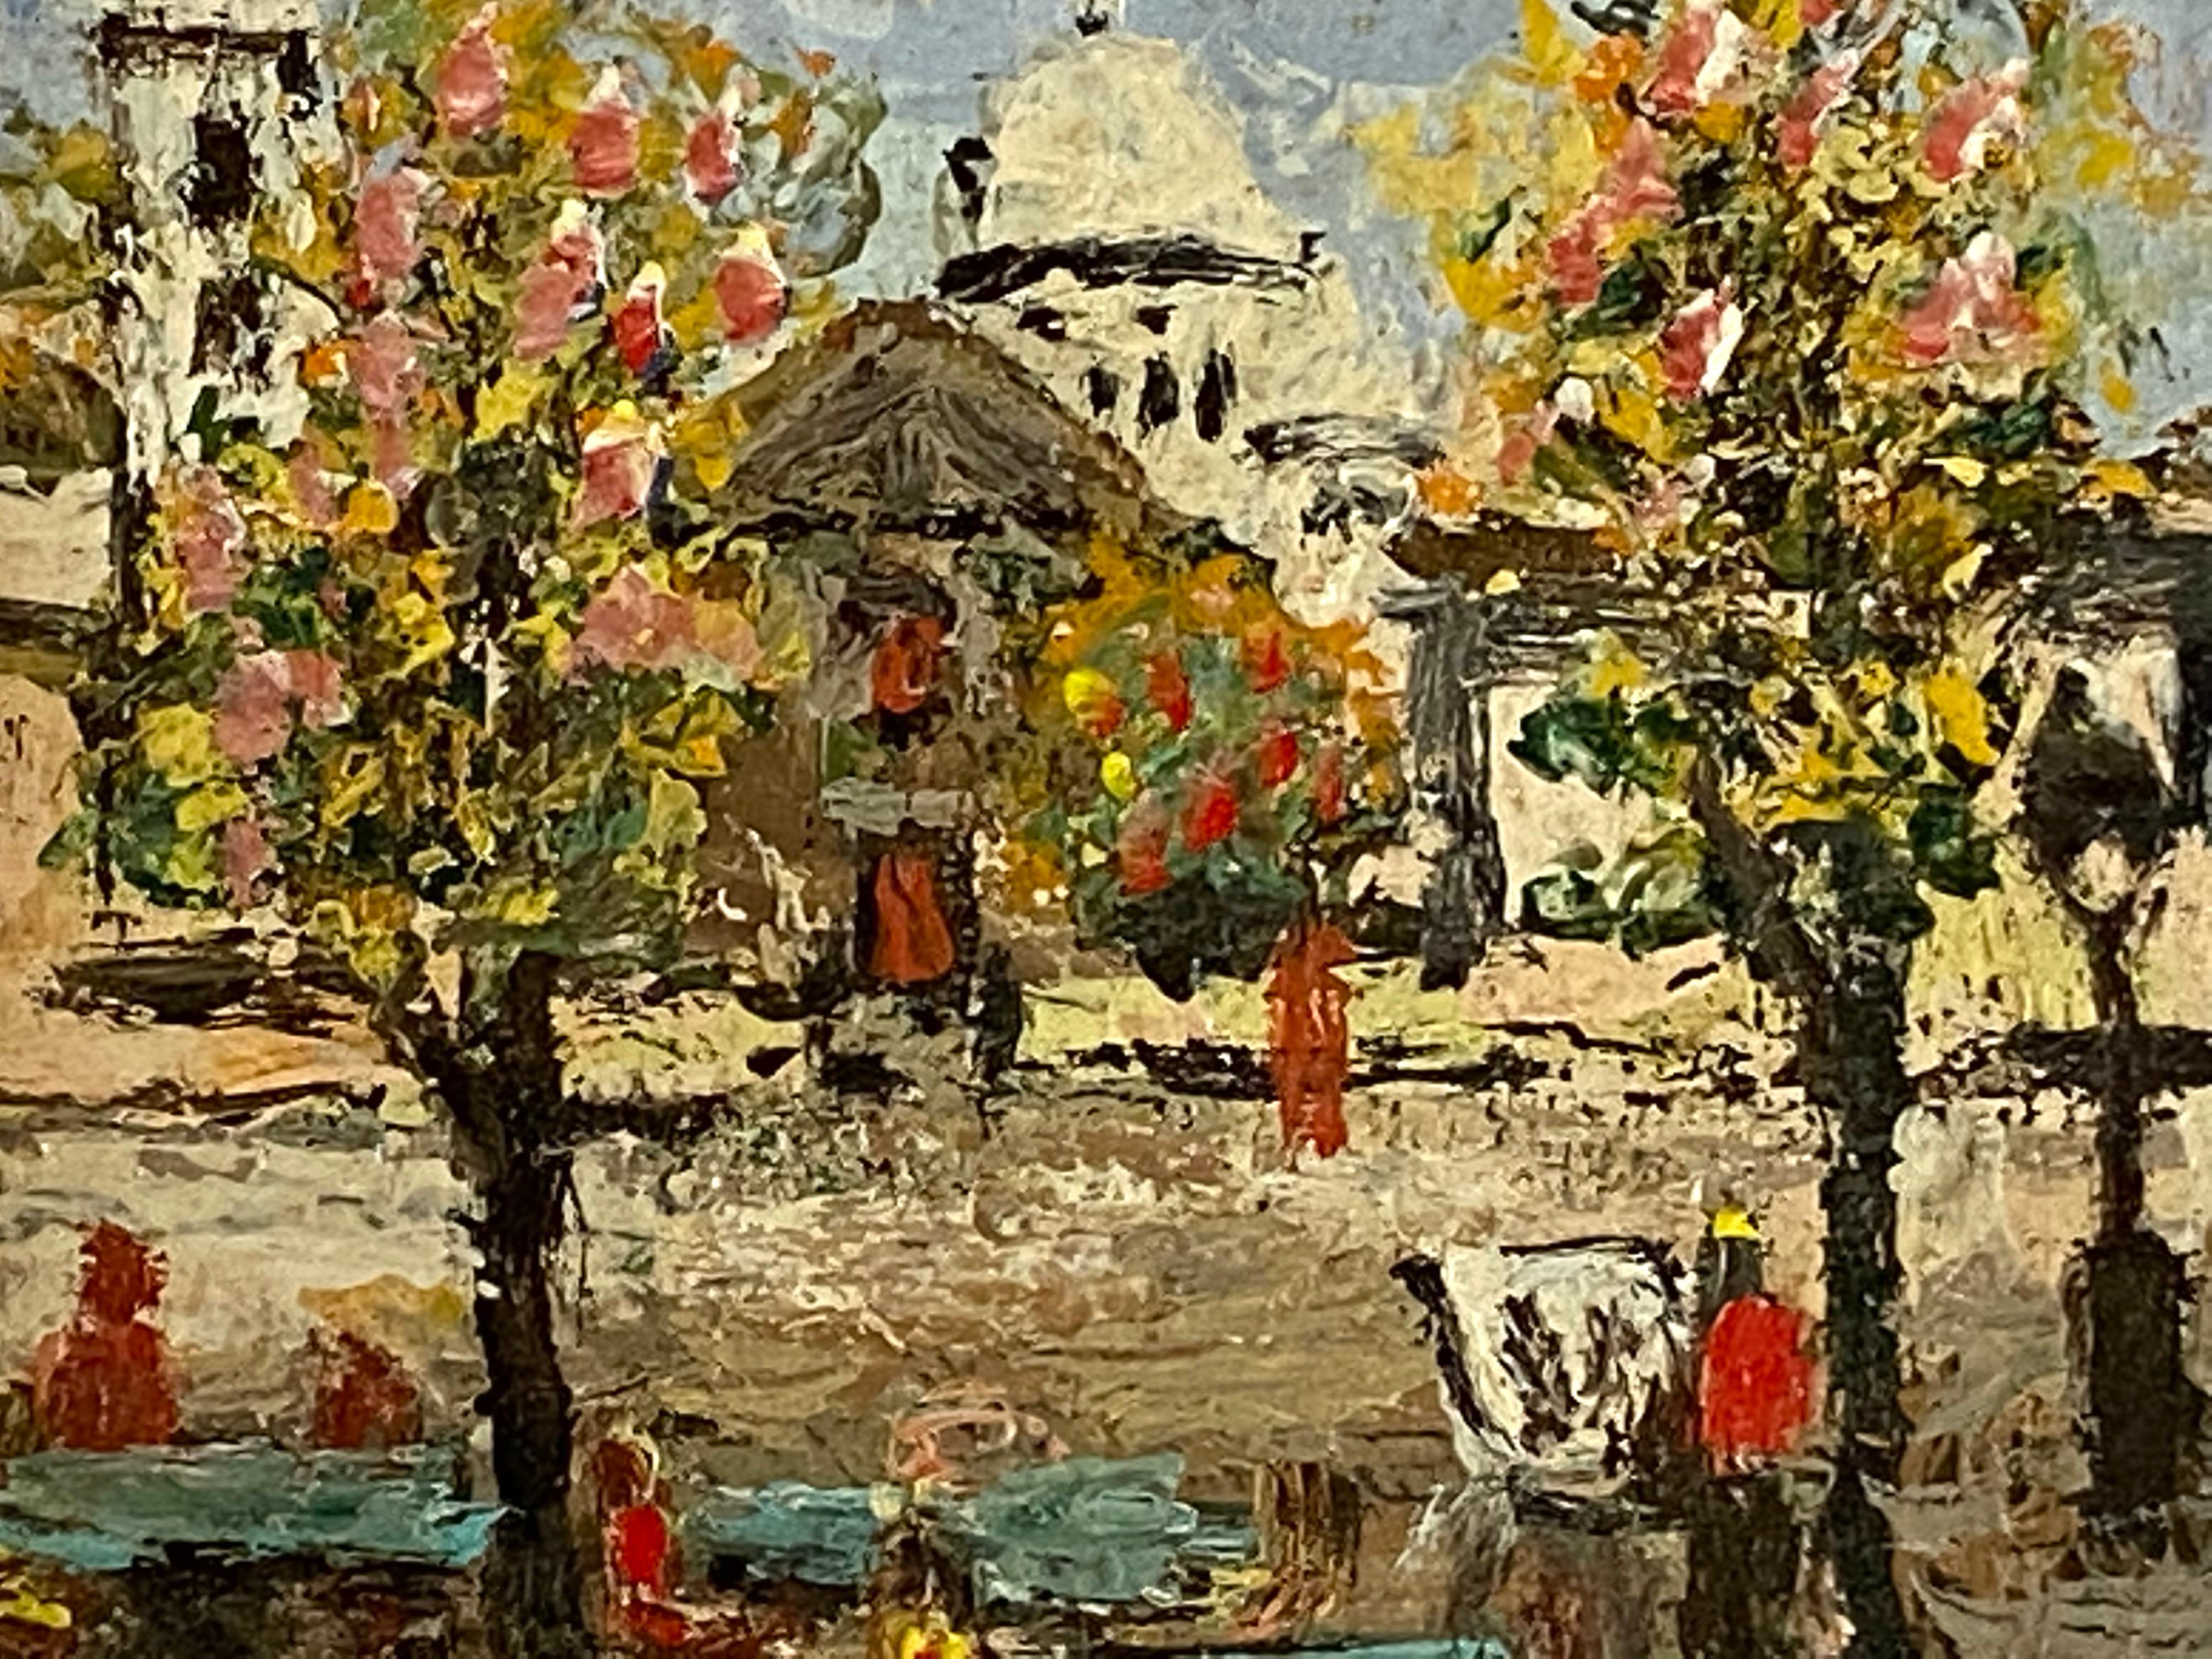 Miniature oil on board original painting of a view of Place du Tertre in Montmartre, Paris. France.  Circa 1975.  Signed illegibly lower right.  Condition is excellent.  Original gold frame. Overall framed measurements are 5.5 by  6.75 inches. 